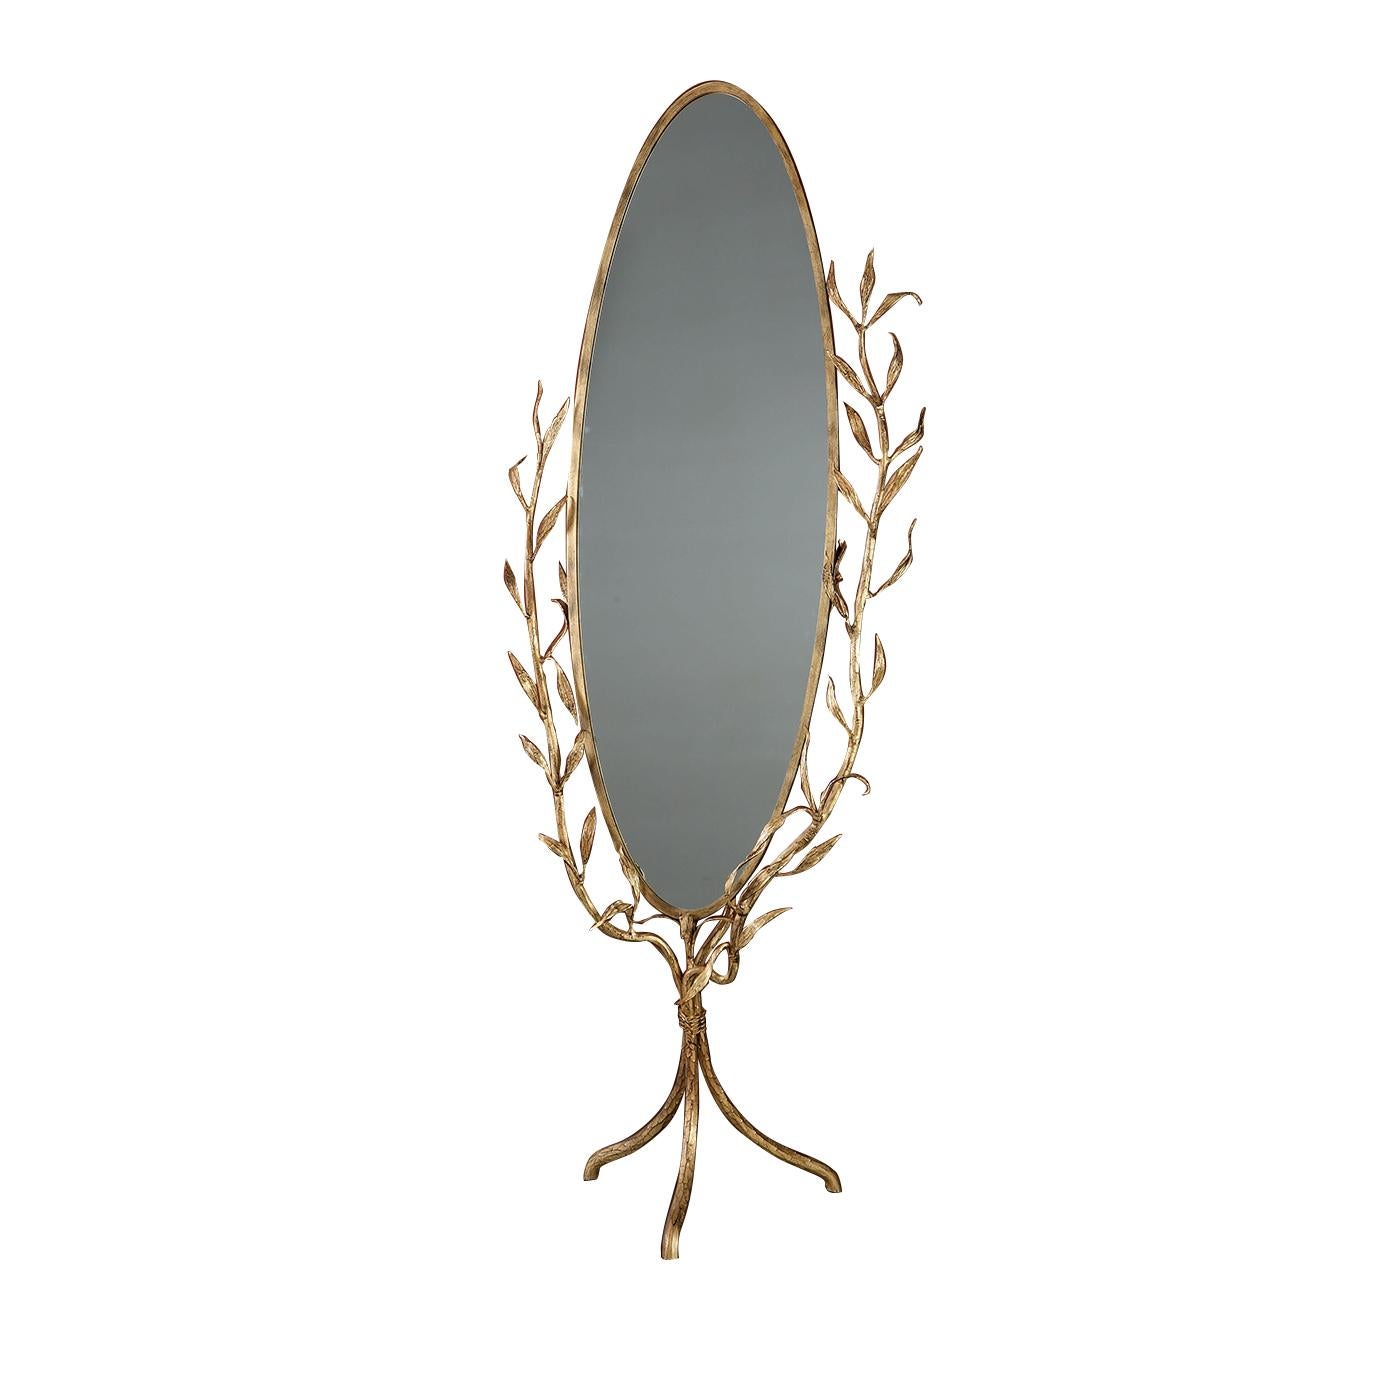 A magnificent piece of functional decor, this superb mirror will be a precious addition in a bedroom, study, or powder room, particularly in a classically-decorated or traditionally-inspired home. The structure is in hand forged iron with a delicate